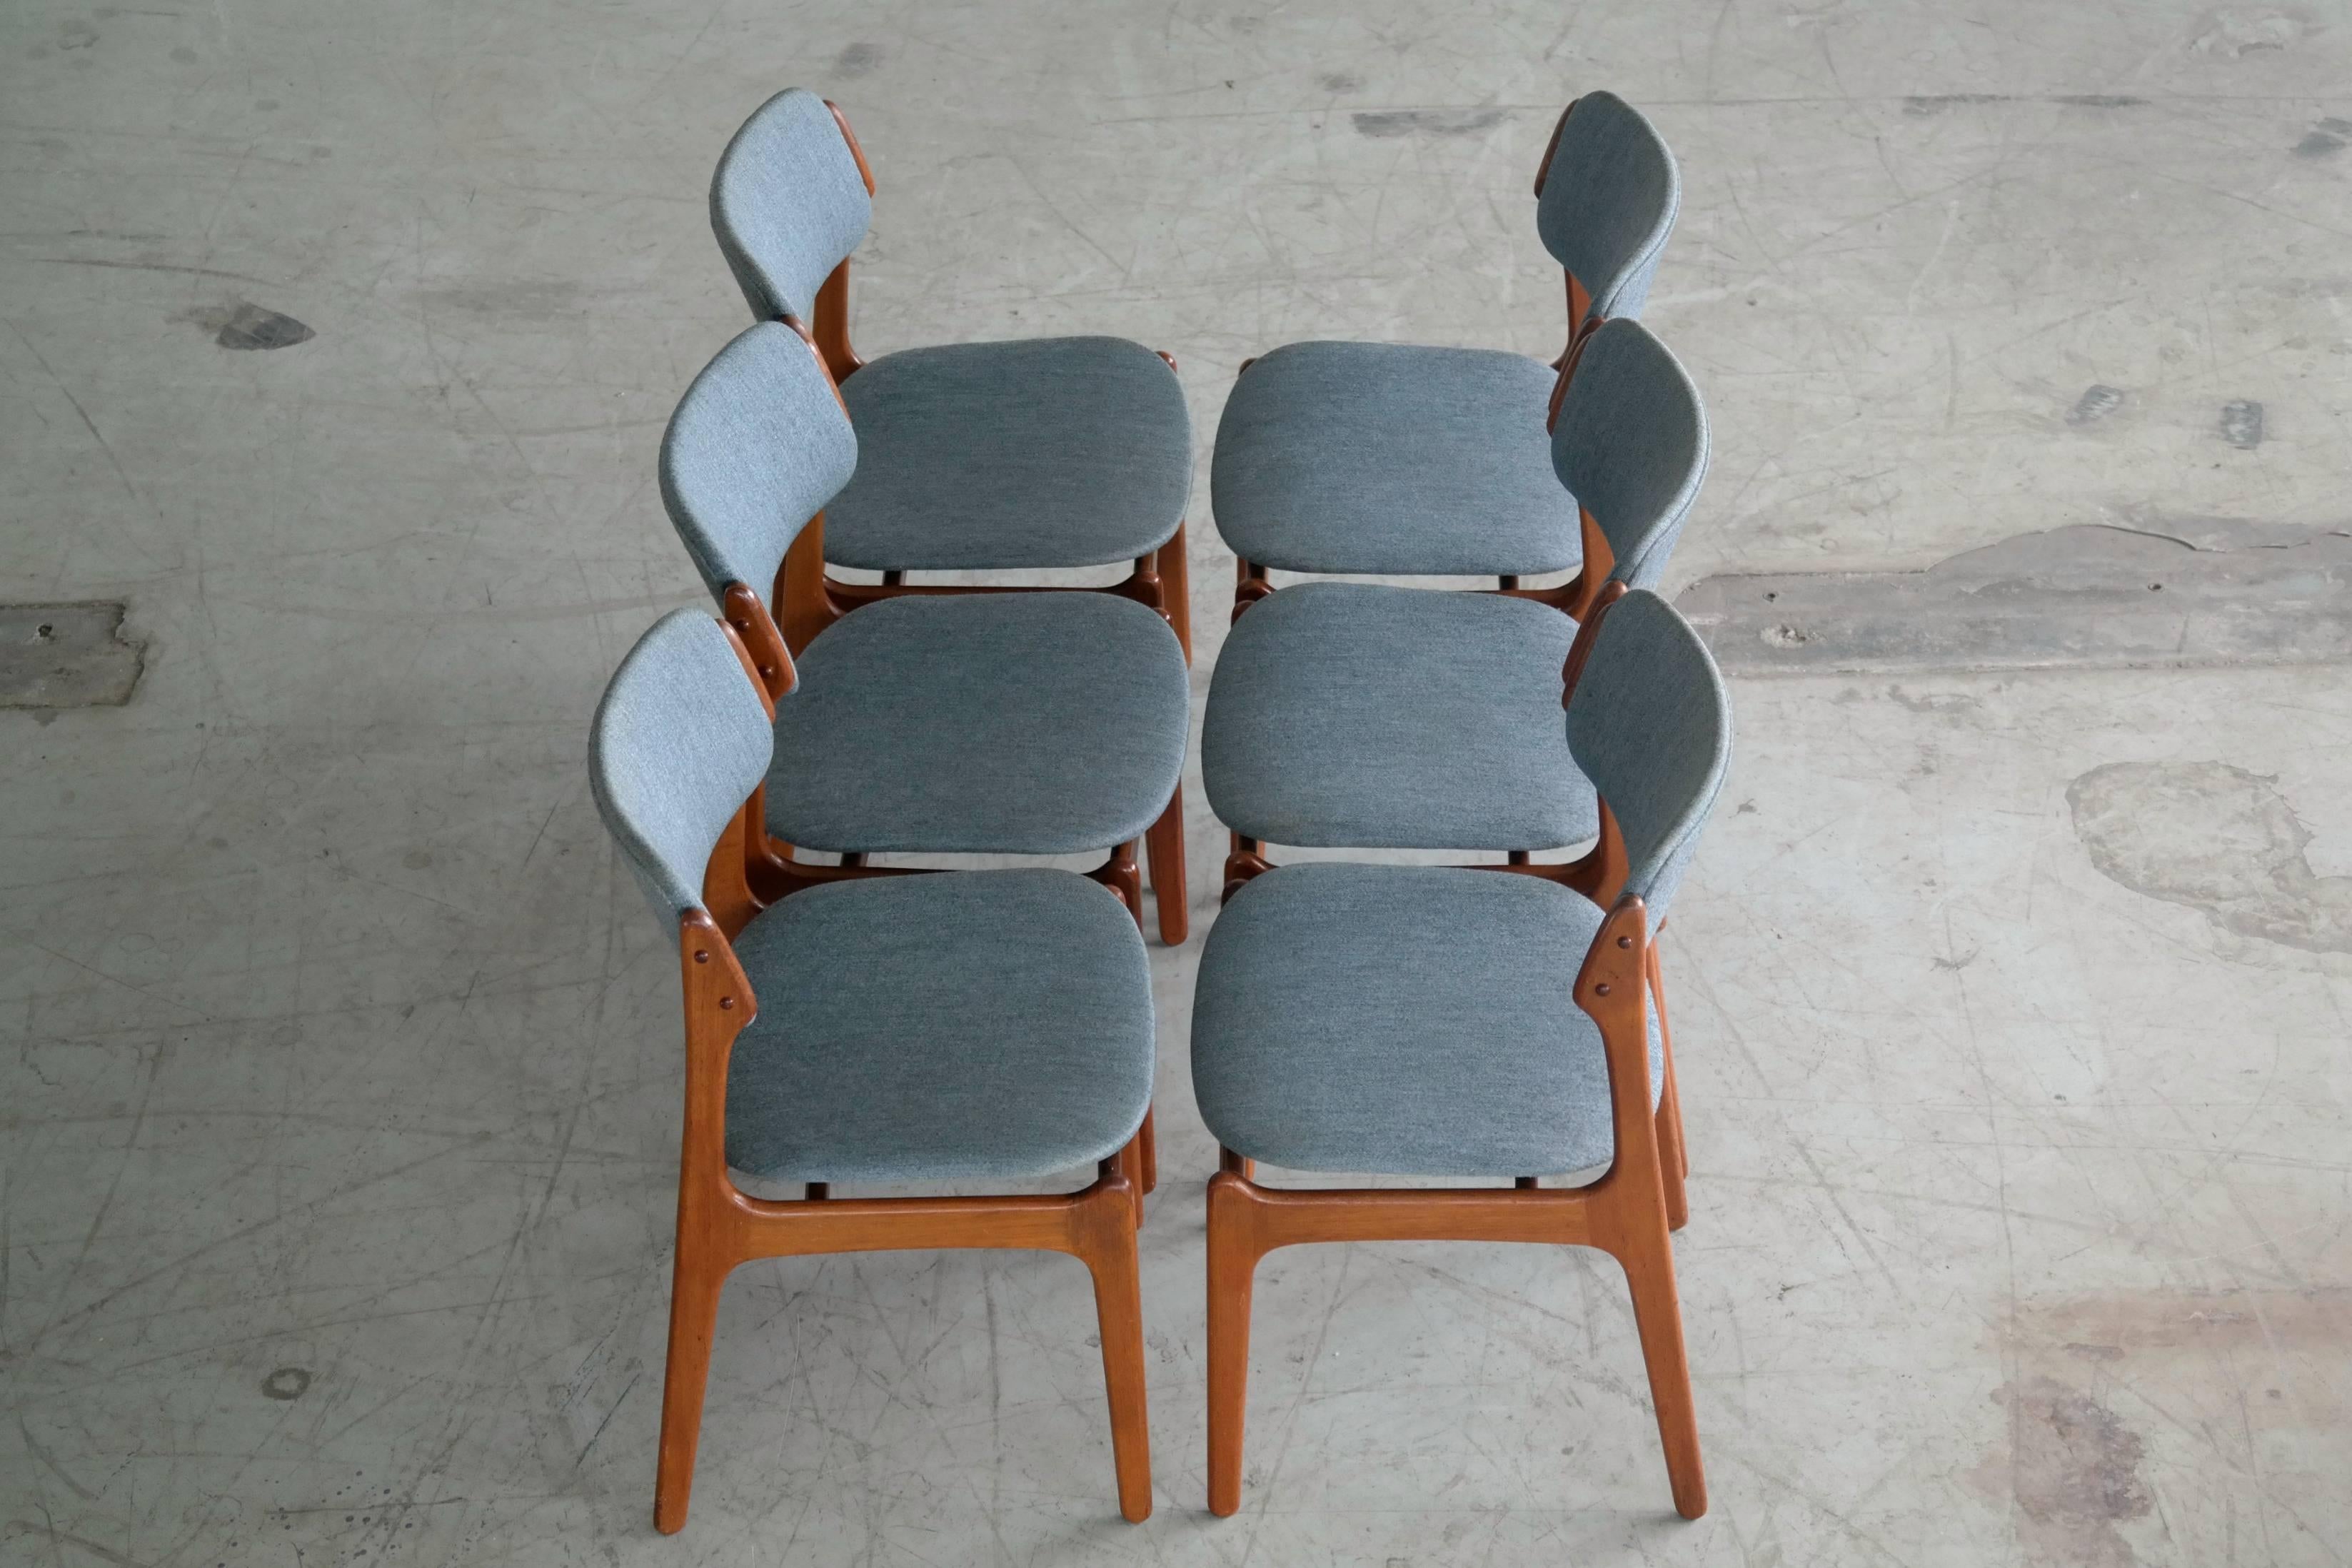 Beautiful set of six Mid-Century Danish dining chairs designed by Erik Buch for OD Mobler A/S, Odense Denmark, circa 1960s
Danish dining chairs are Classic because of their simple yet elegant lines, comfortable seating experience and solid